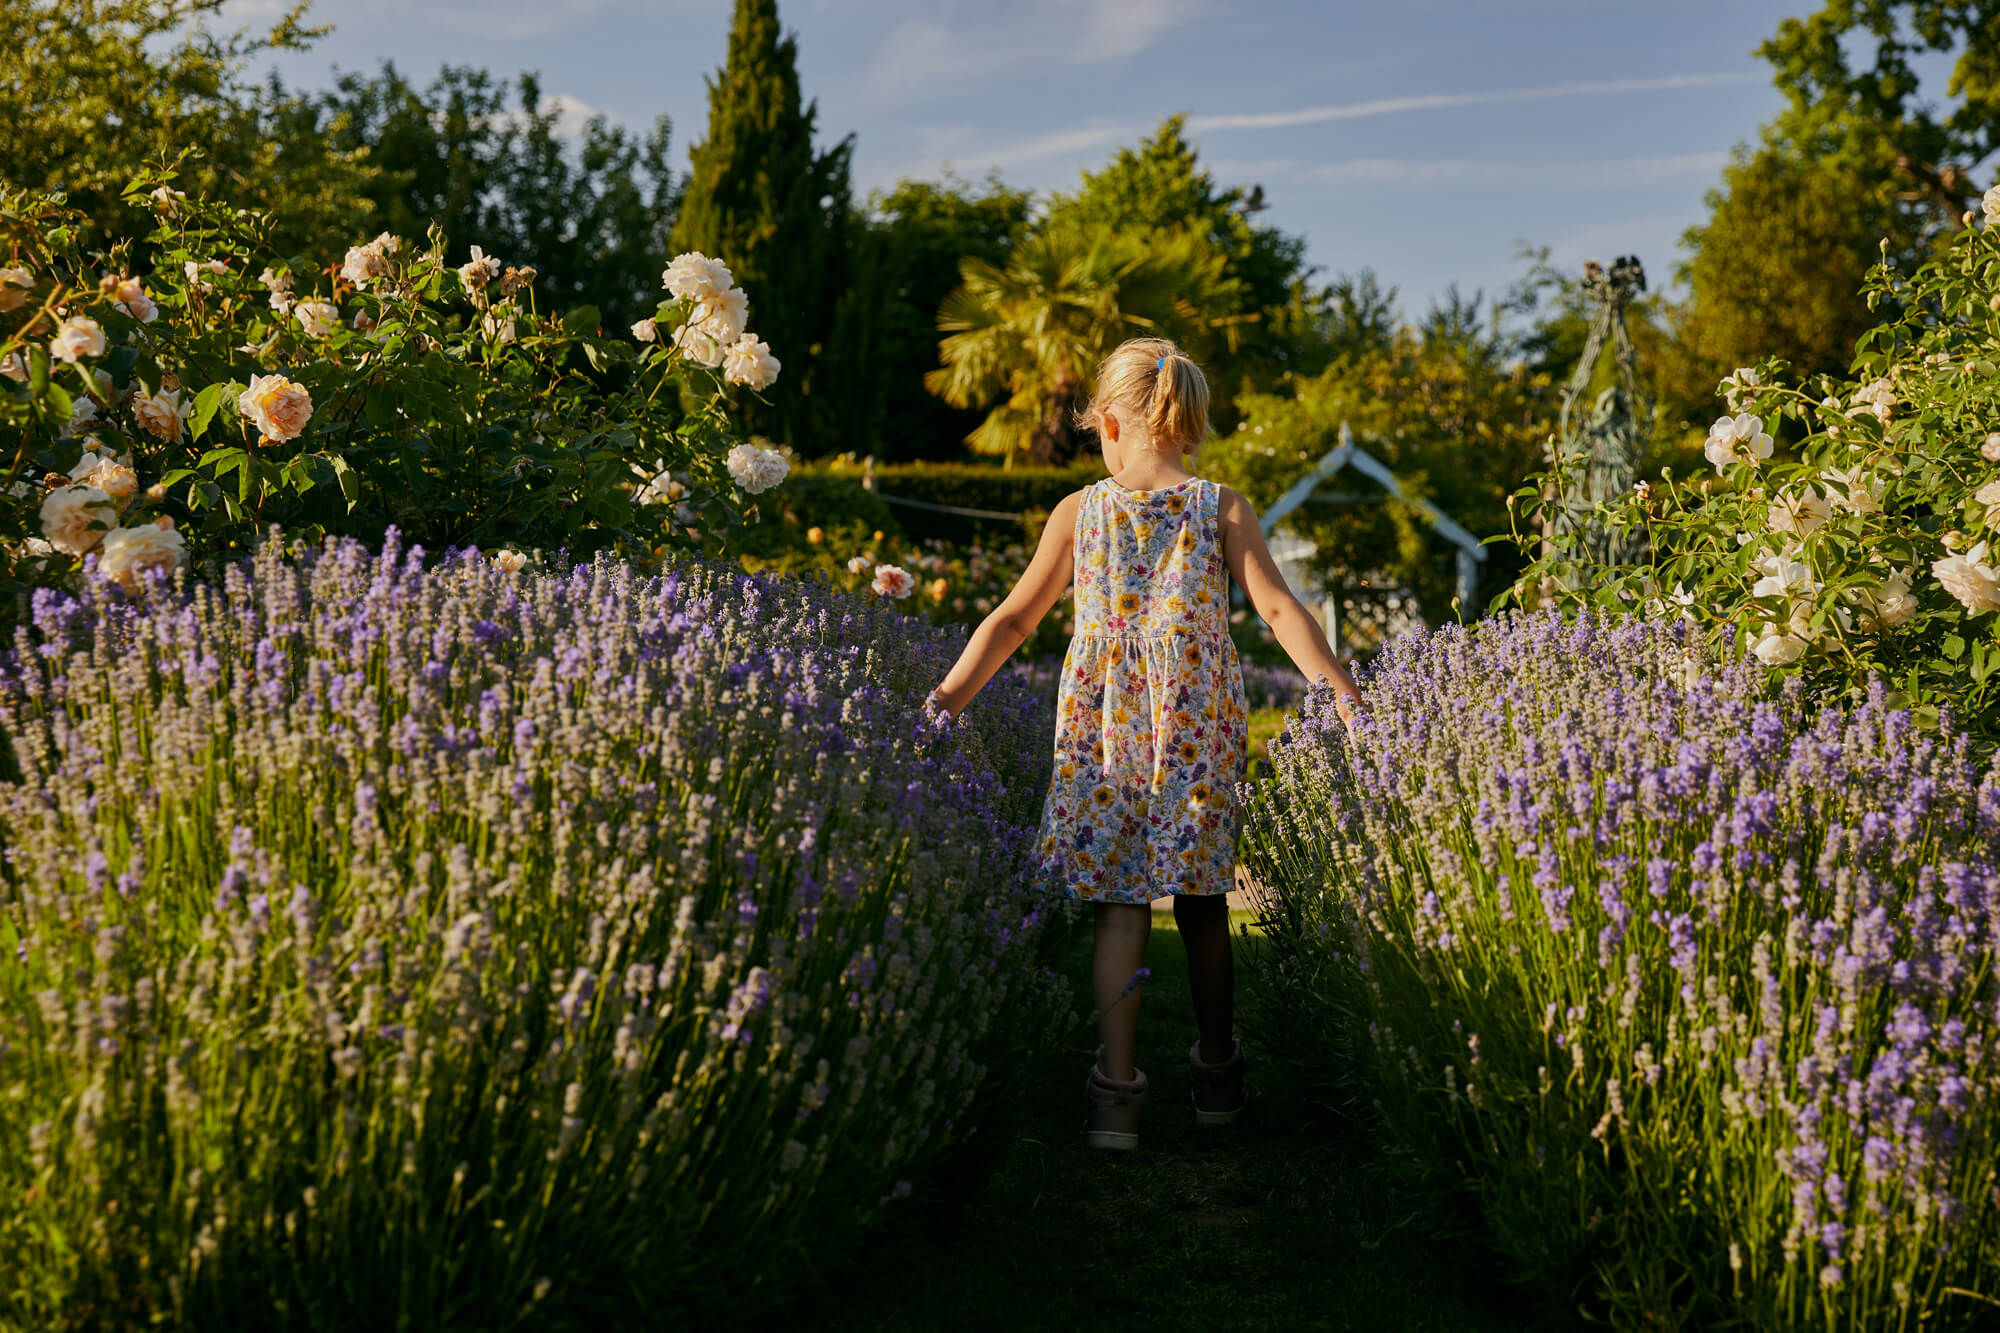 A summertime view of a child walking between lavendar and roses in the Rose Garden at Borde Hill.